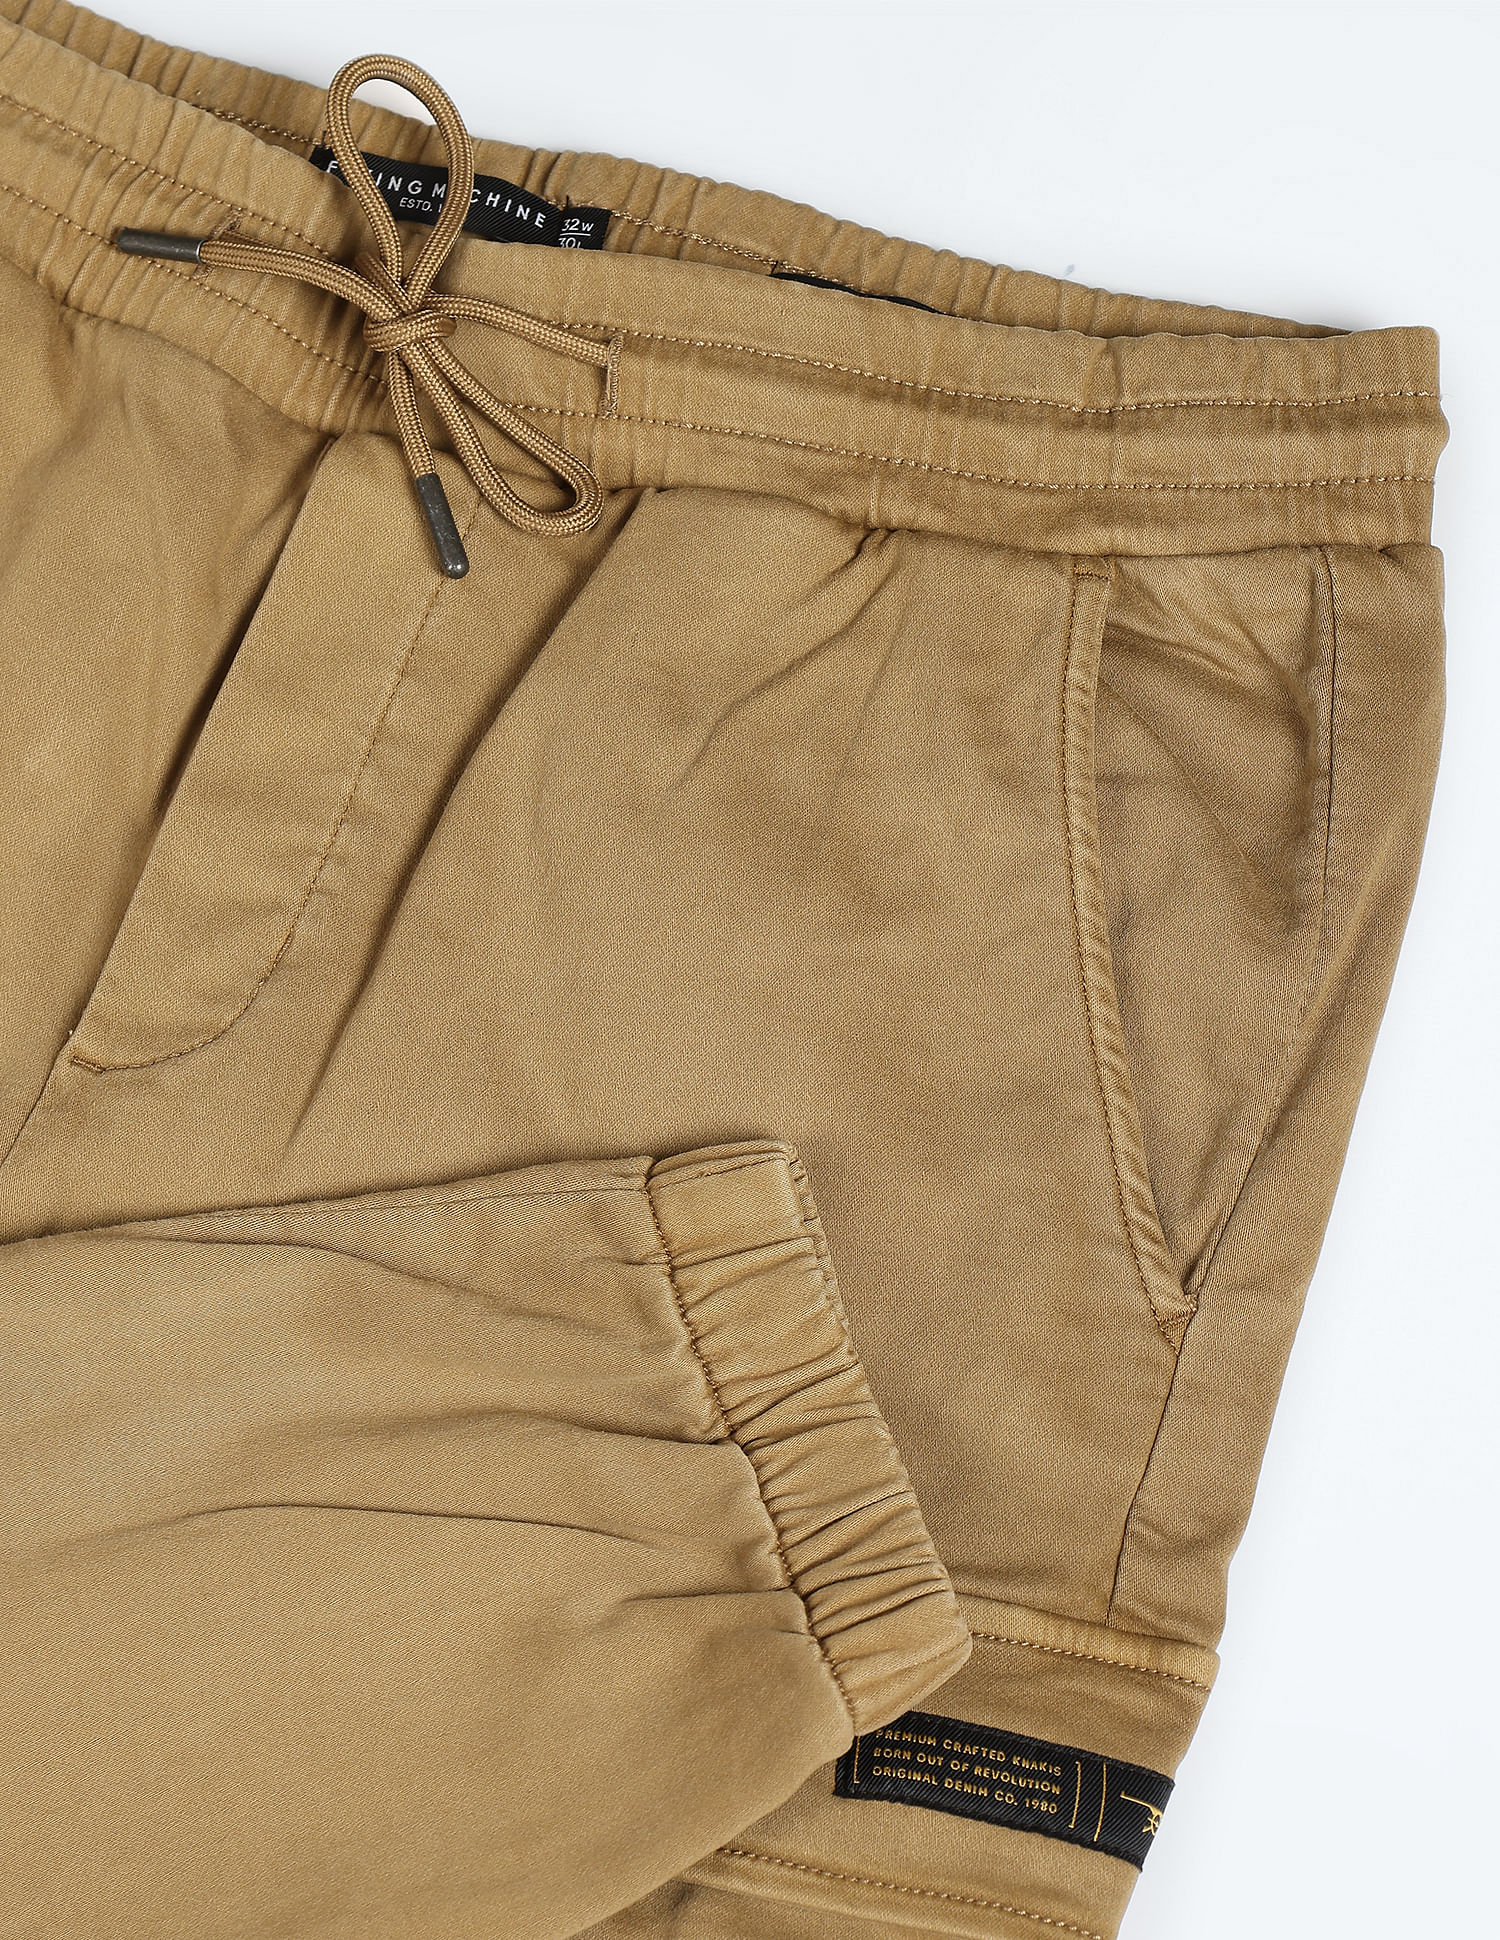 FADED GLORY MEN'S Cargo Jogger Pants size SMALL (28-30) brand new $14.99 -  PicClick